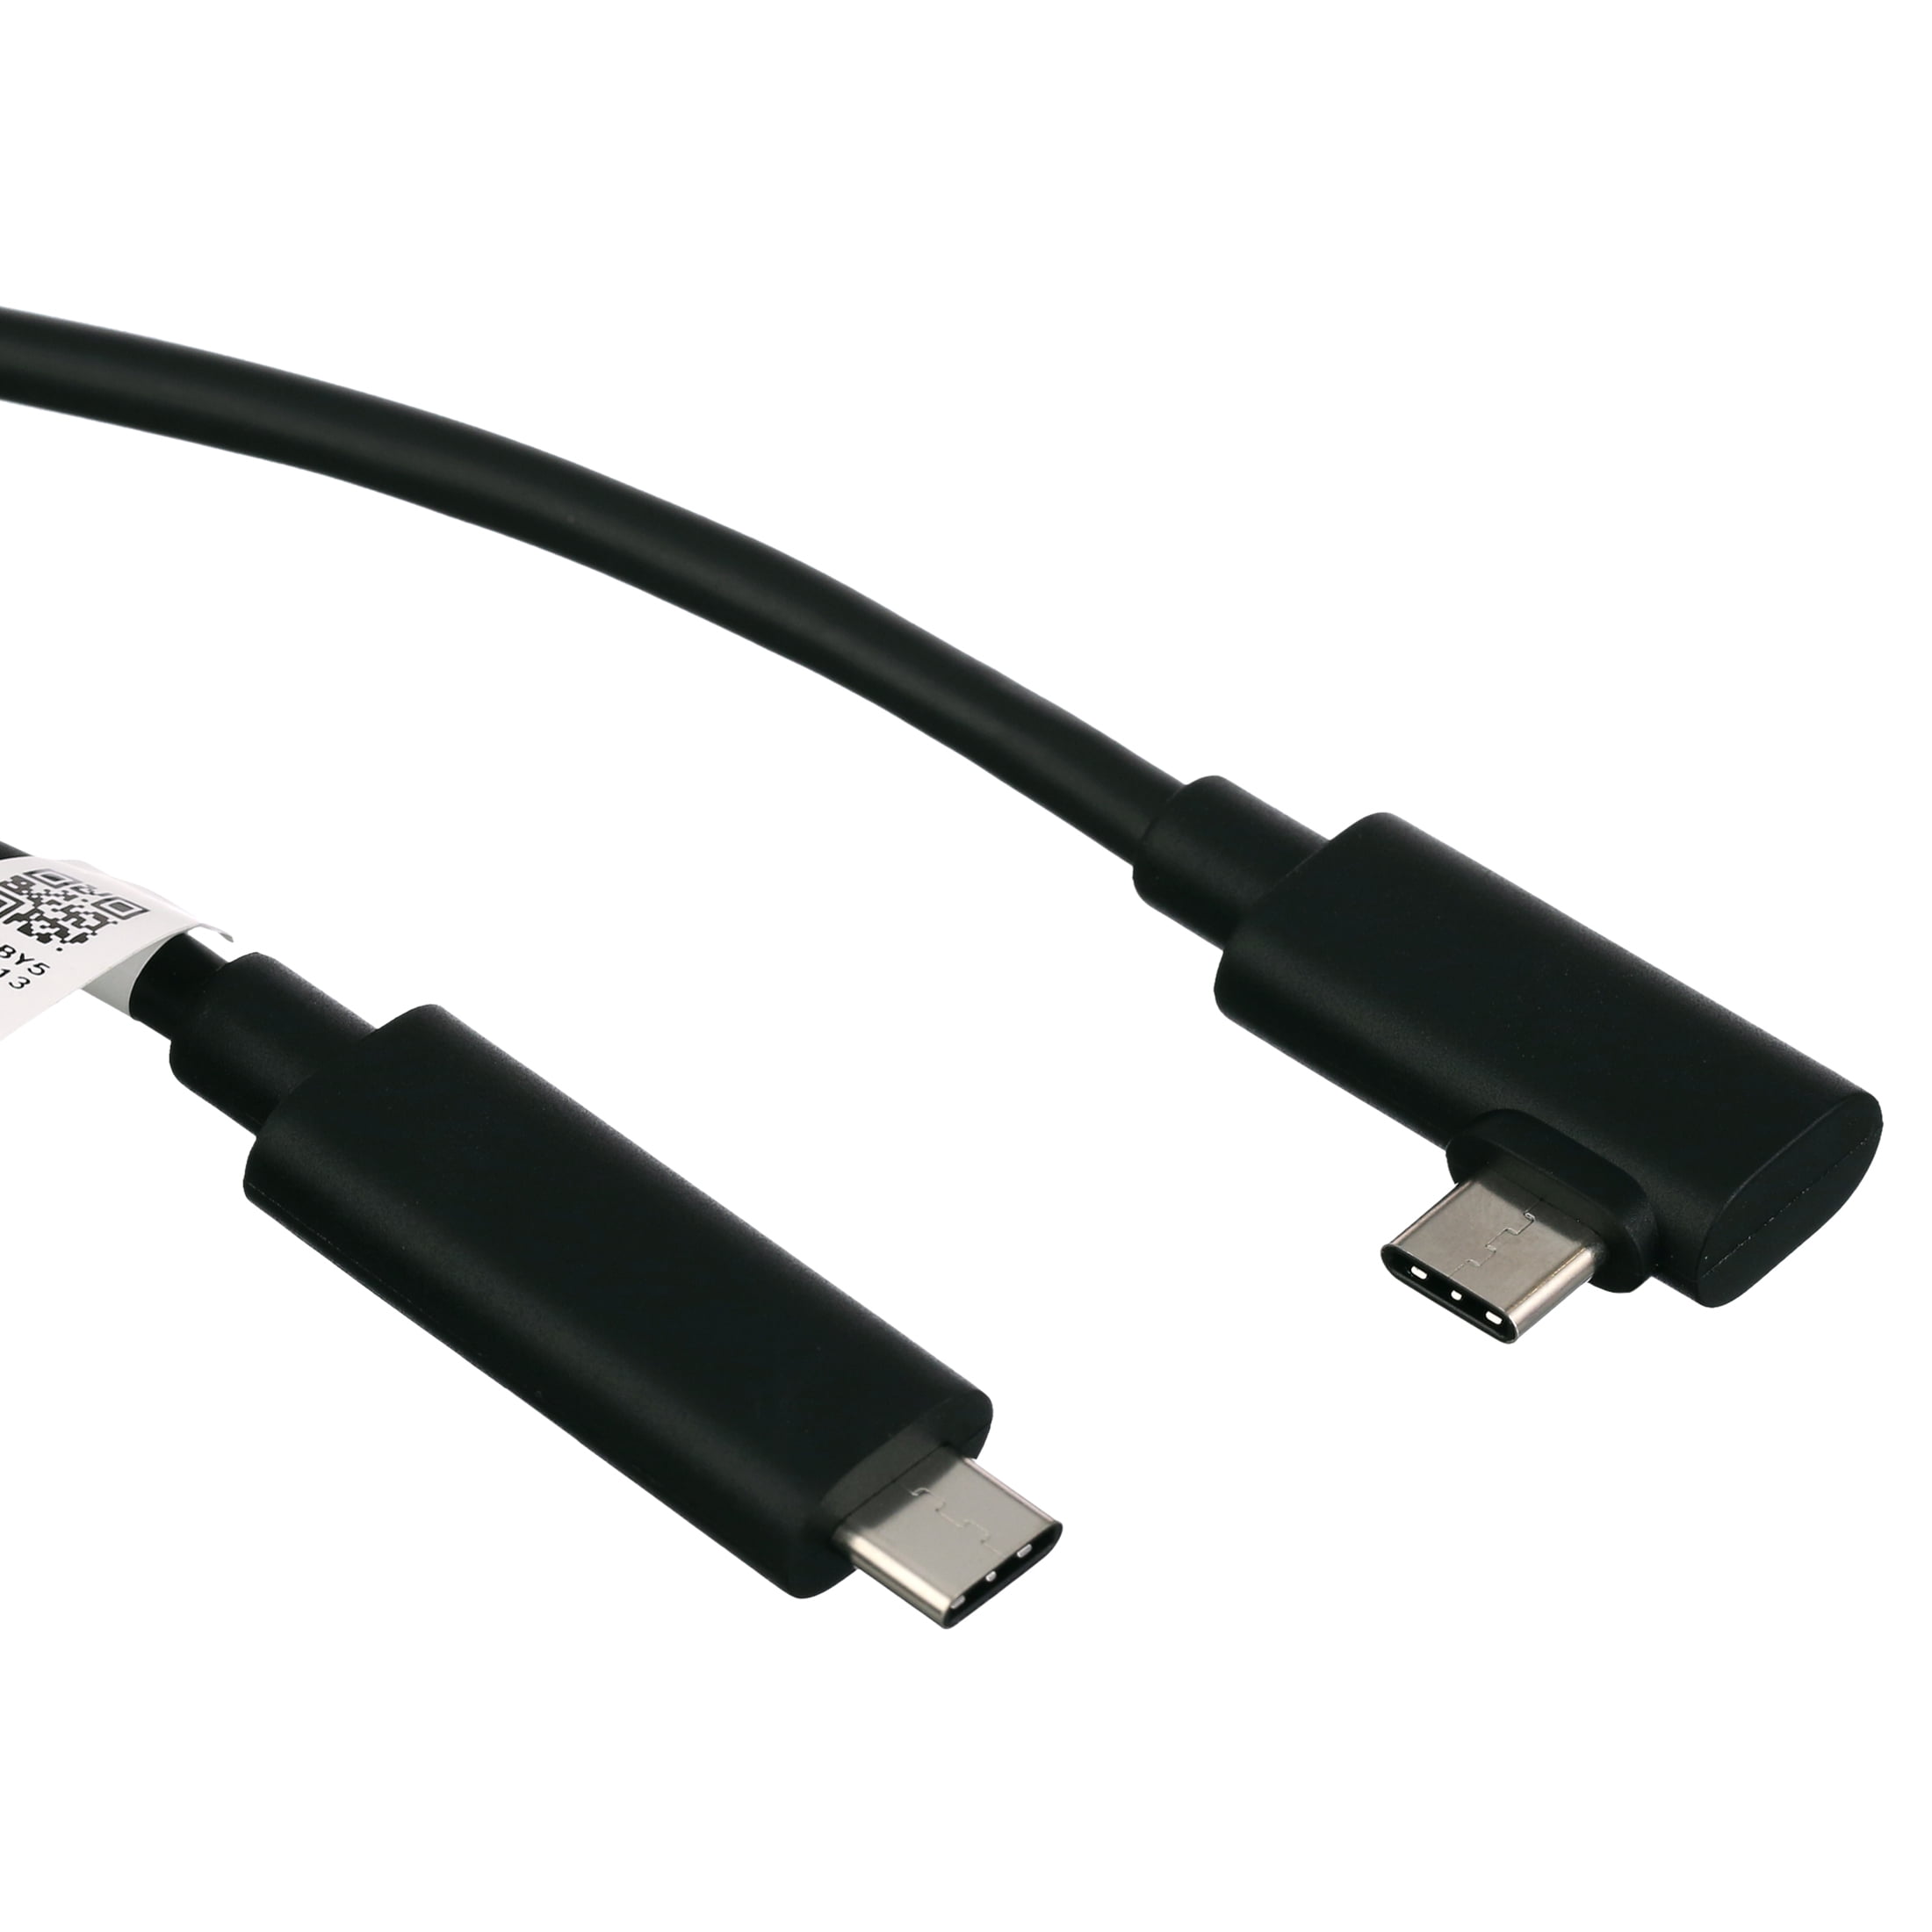 Quest (Oculus) Link Virtual Reality Headset Cable for Quest 2 and